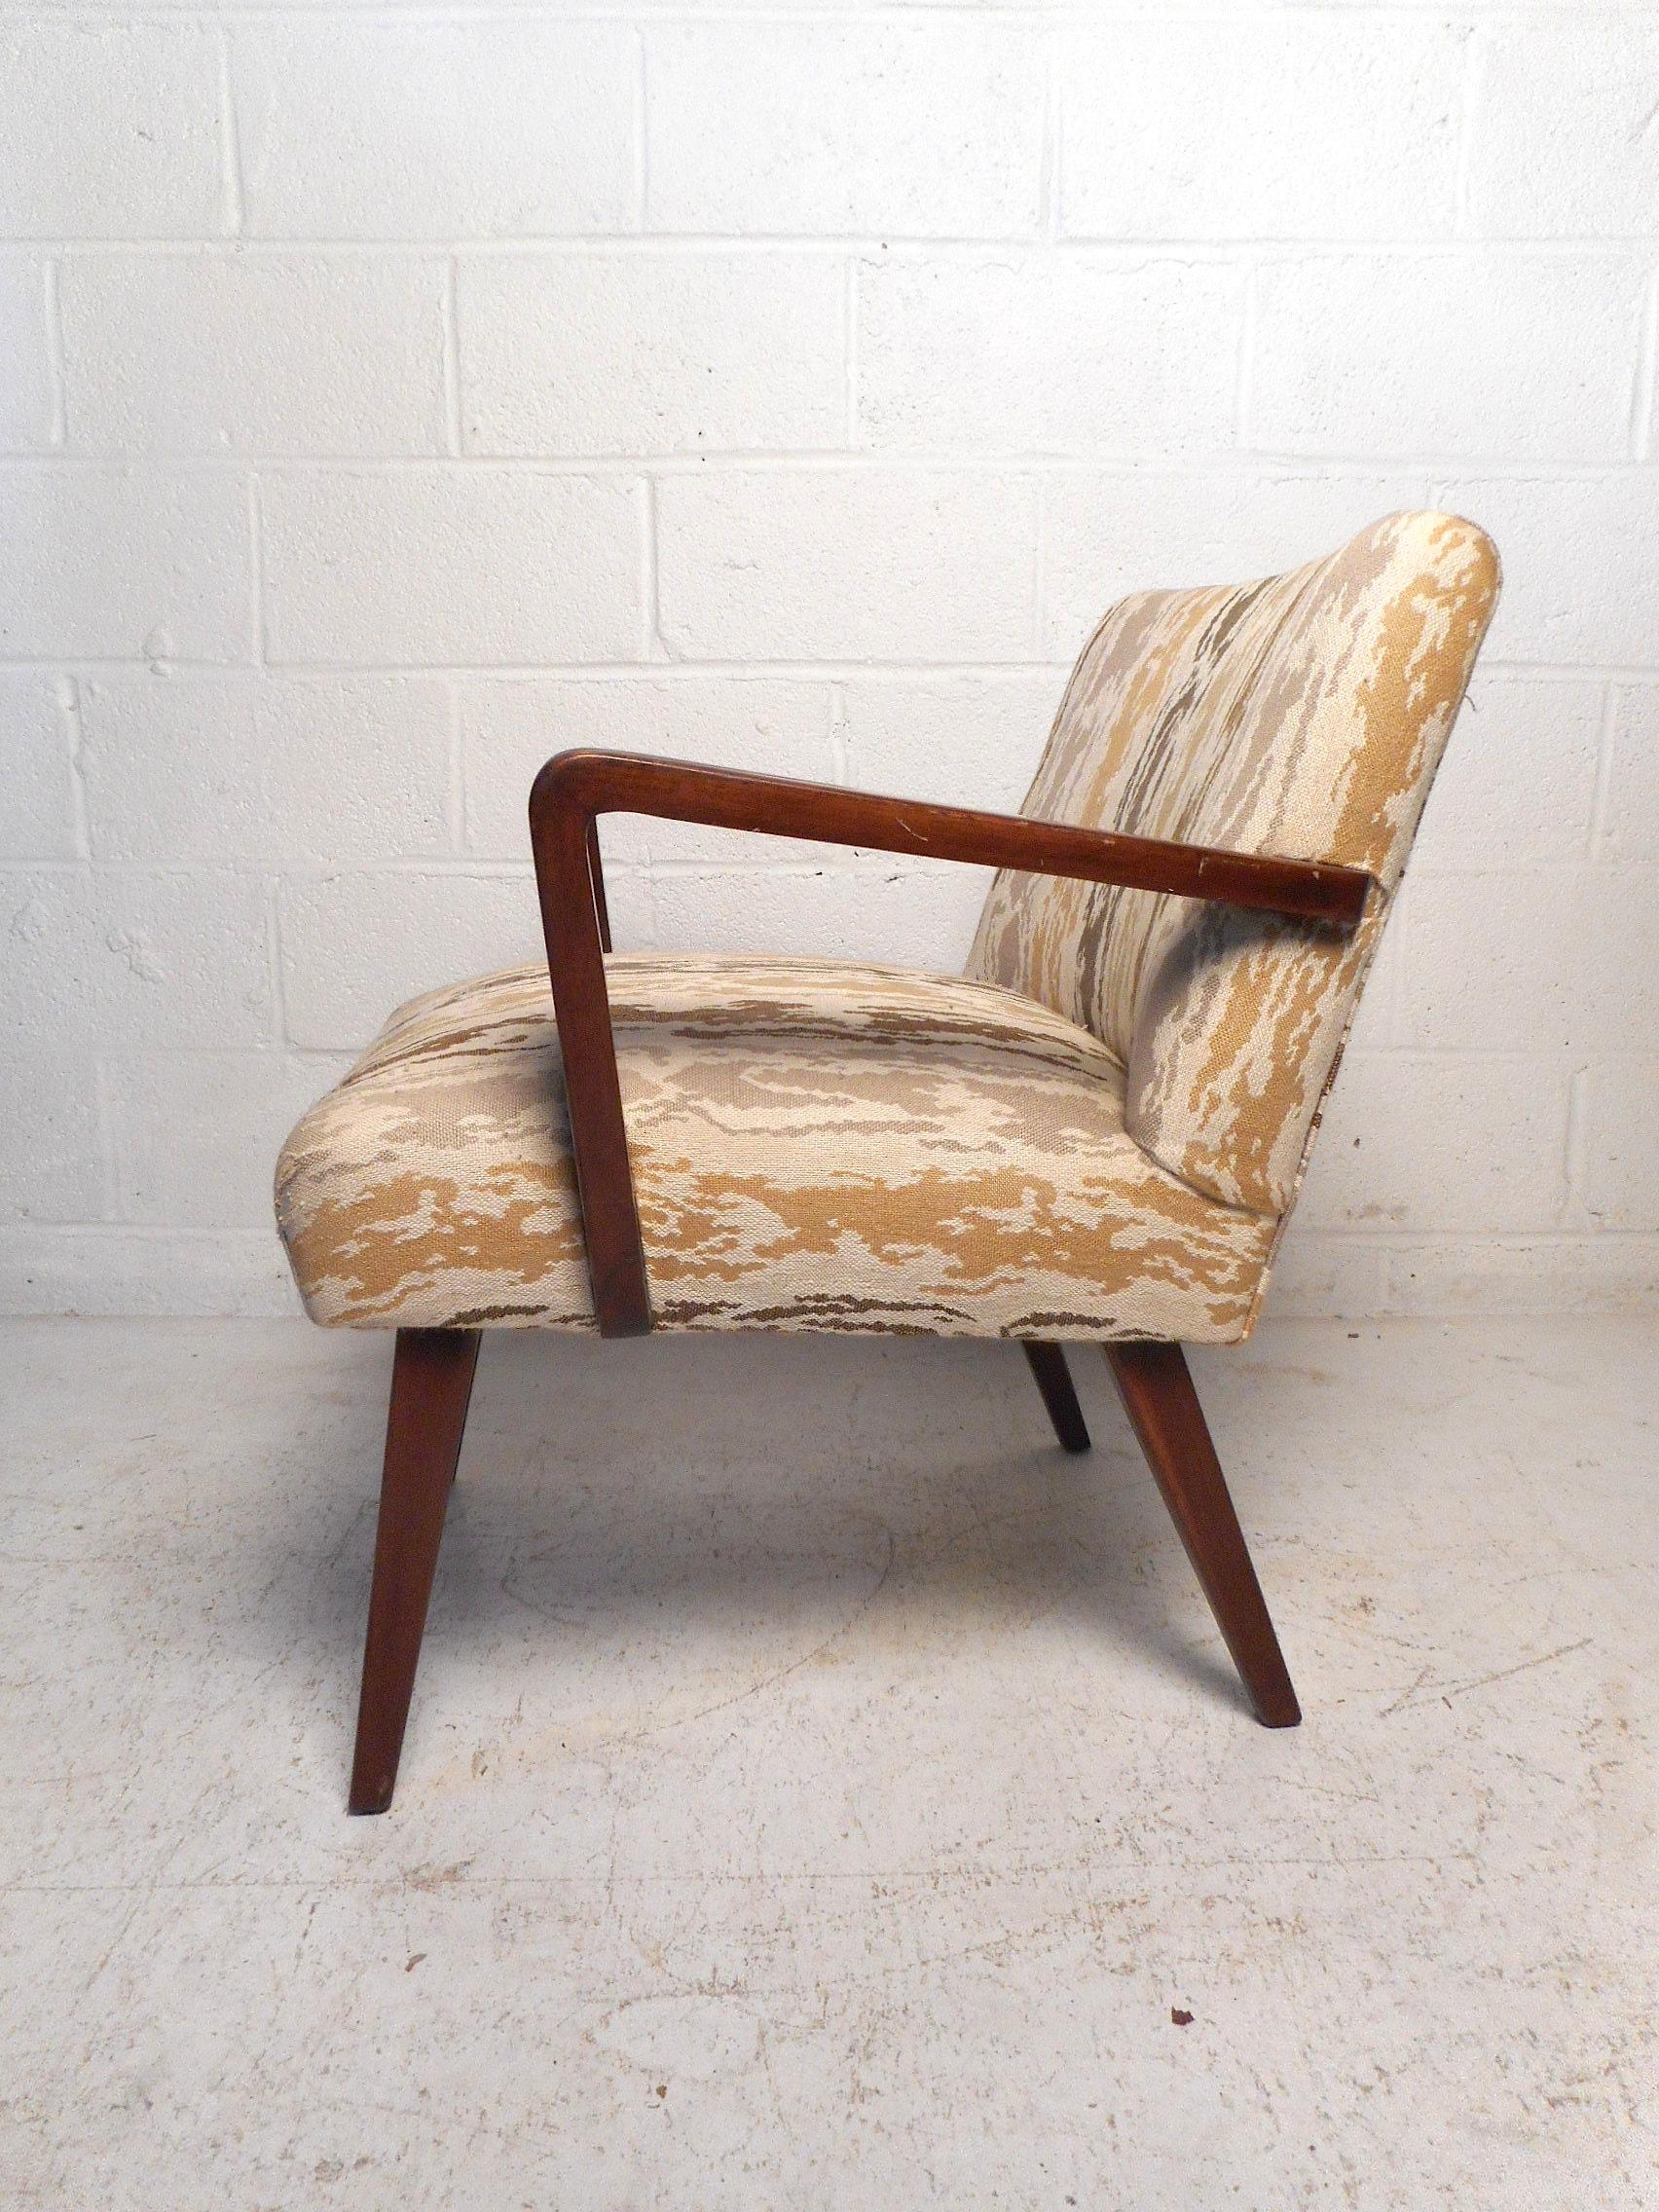 This impressive Mid-Century Modern lounge chair features a sturdy finished walnut frame, comfortable seating covered with a stylish vintage upholstery, sleekly splayed and tapered legs, and flared armrests giving the piece a remarkable visual